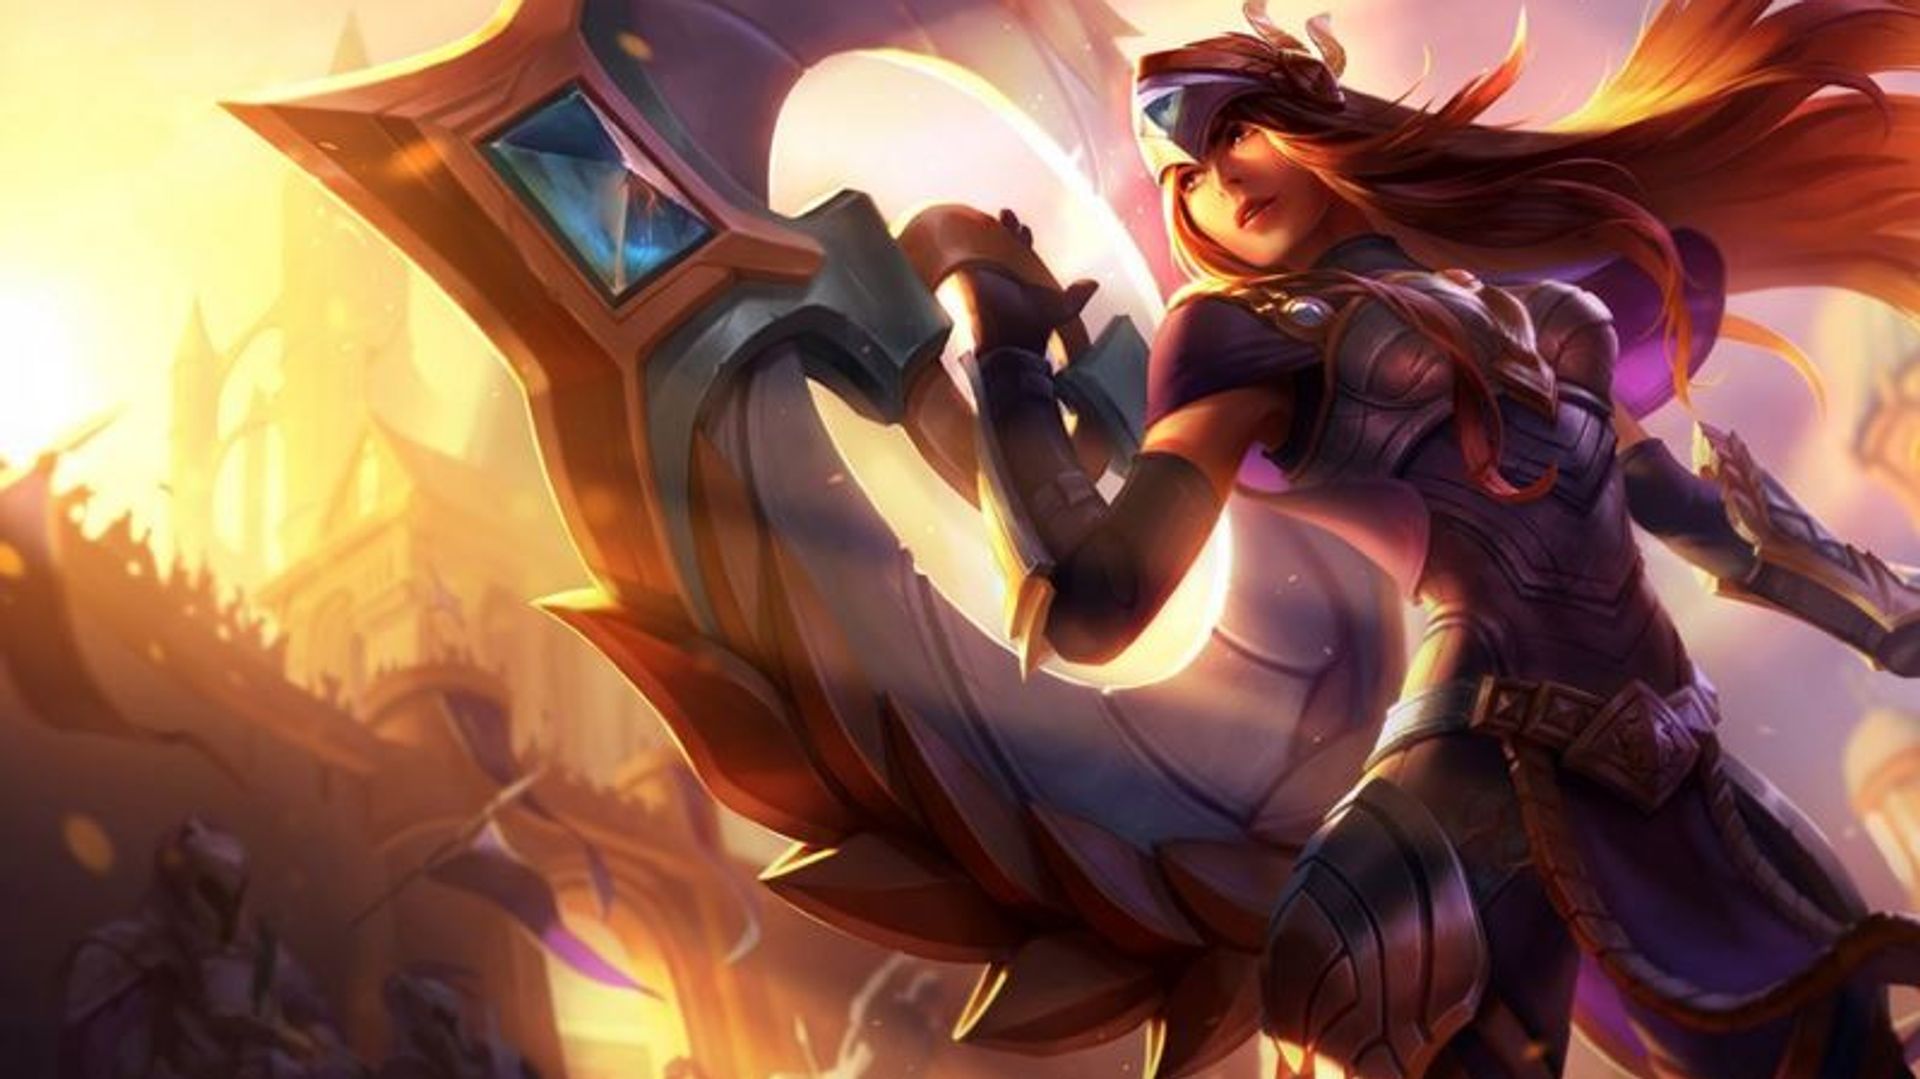 Illaoi 3 is Much Crazier Than We Thought